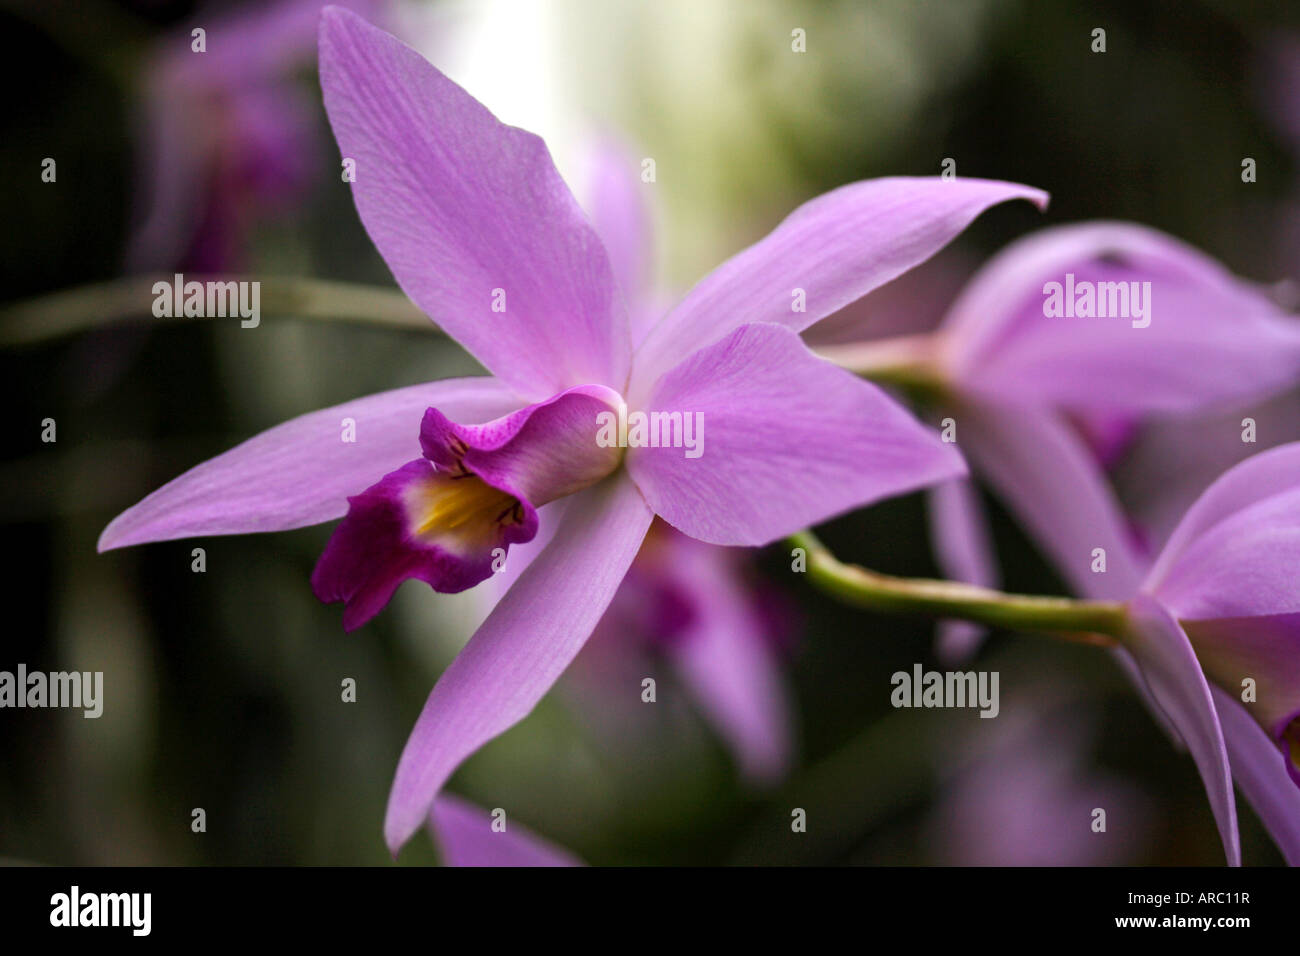 Close-up of a beautiful Laelia orchid flower Stock Photo